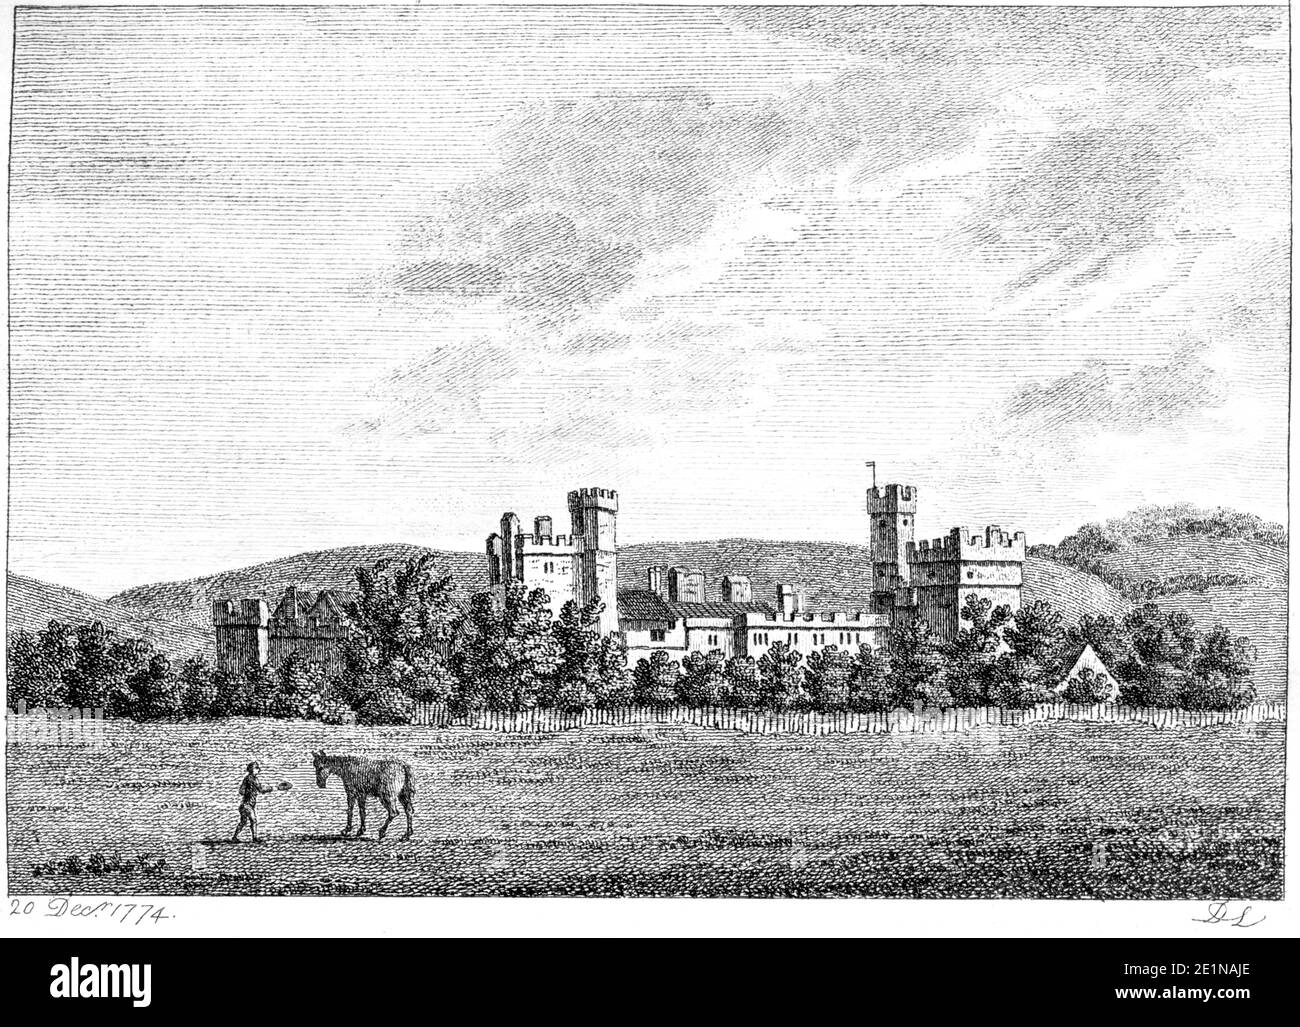 An engraving of Naworth Castle, Cumberland published 20 December 1774 scanned at high resolution from a book published in the 1770s. Stock Photo